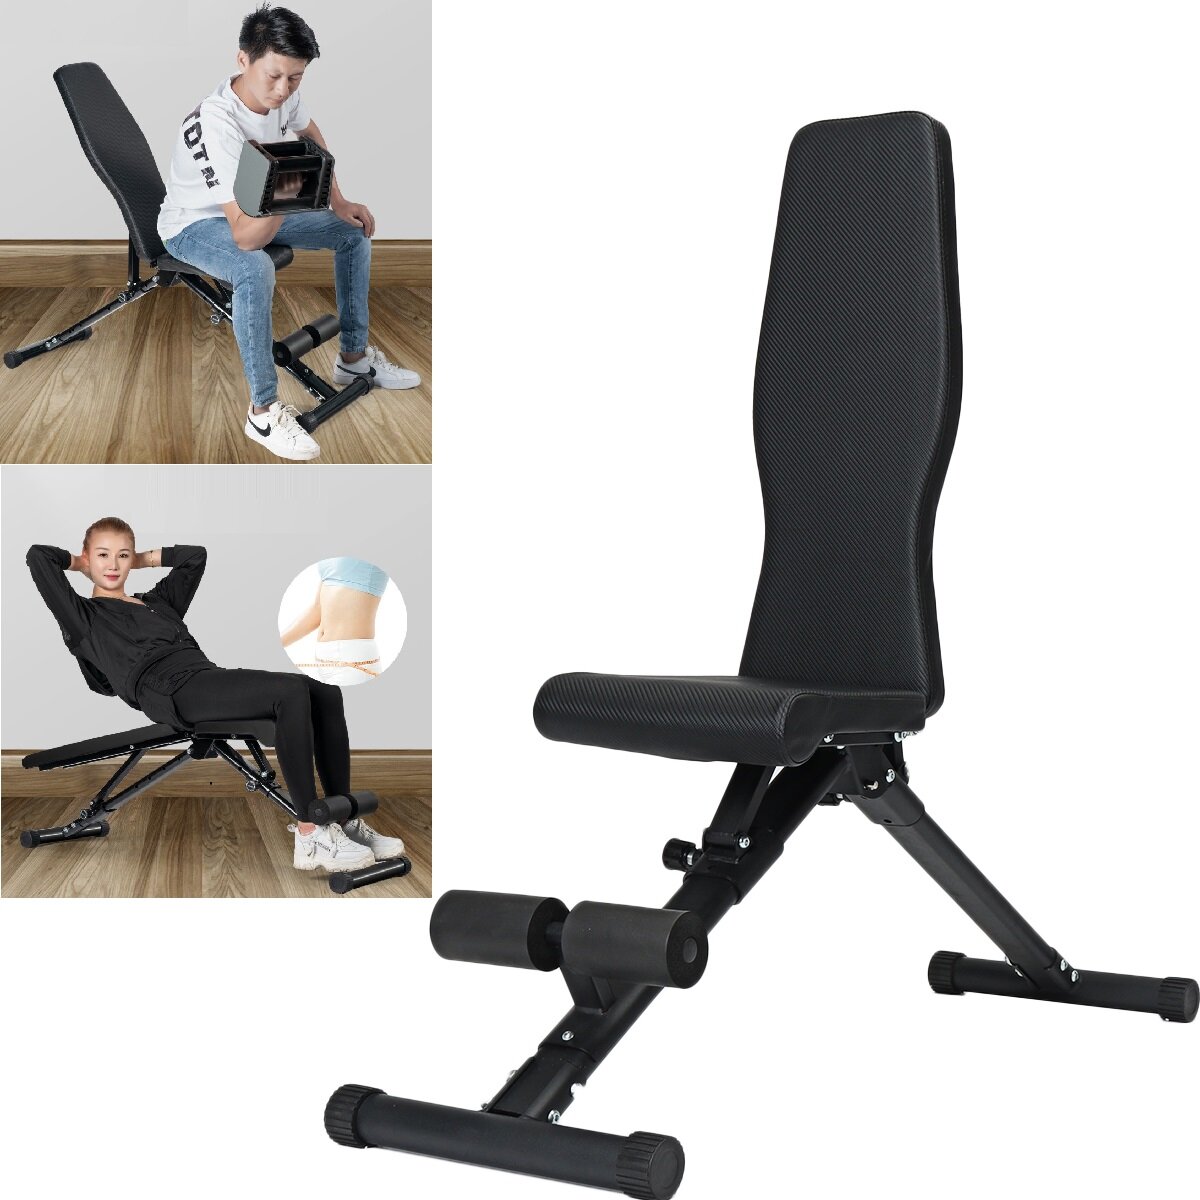 Adjustable Sit Ups Bench With 3 Levels of Cushion Adjustment &7 Levels Of Backrest Adjustment Foldable StableHigh Perf